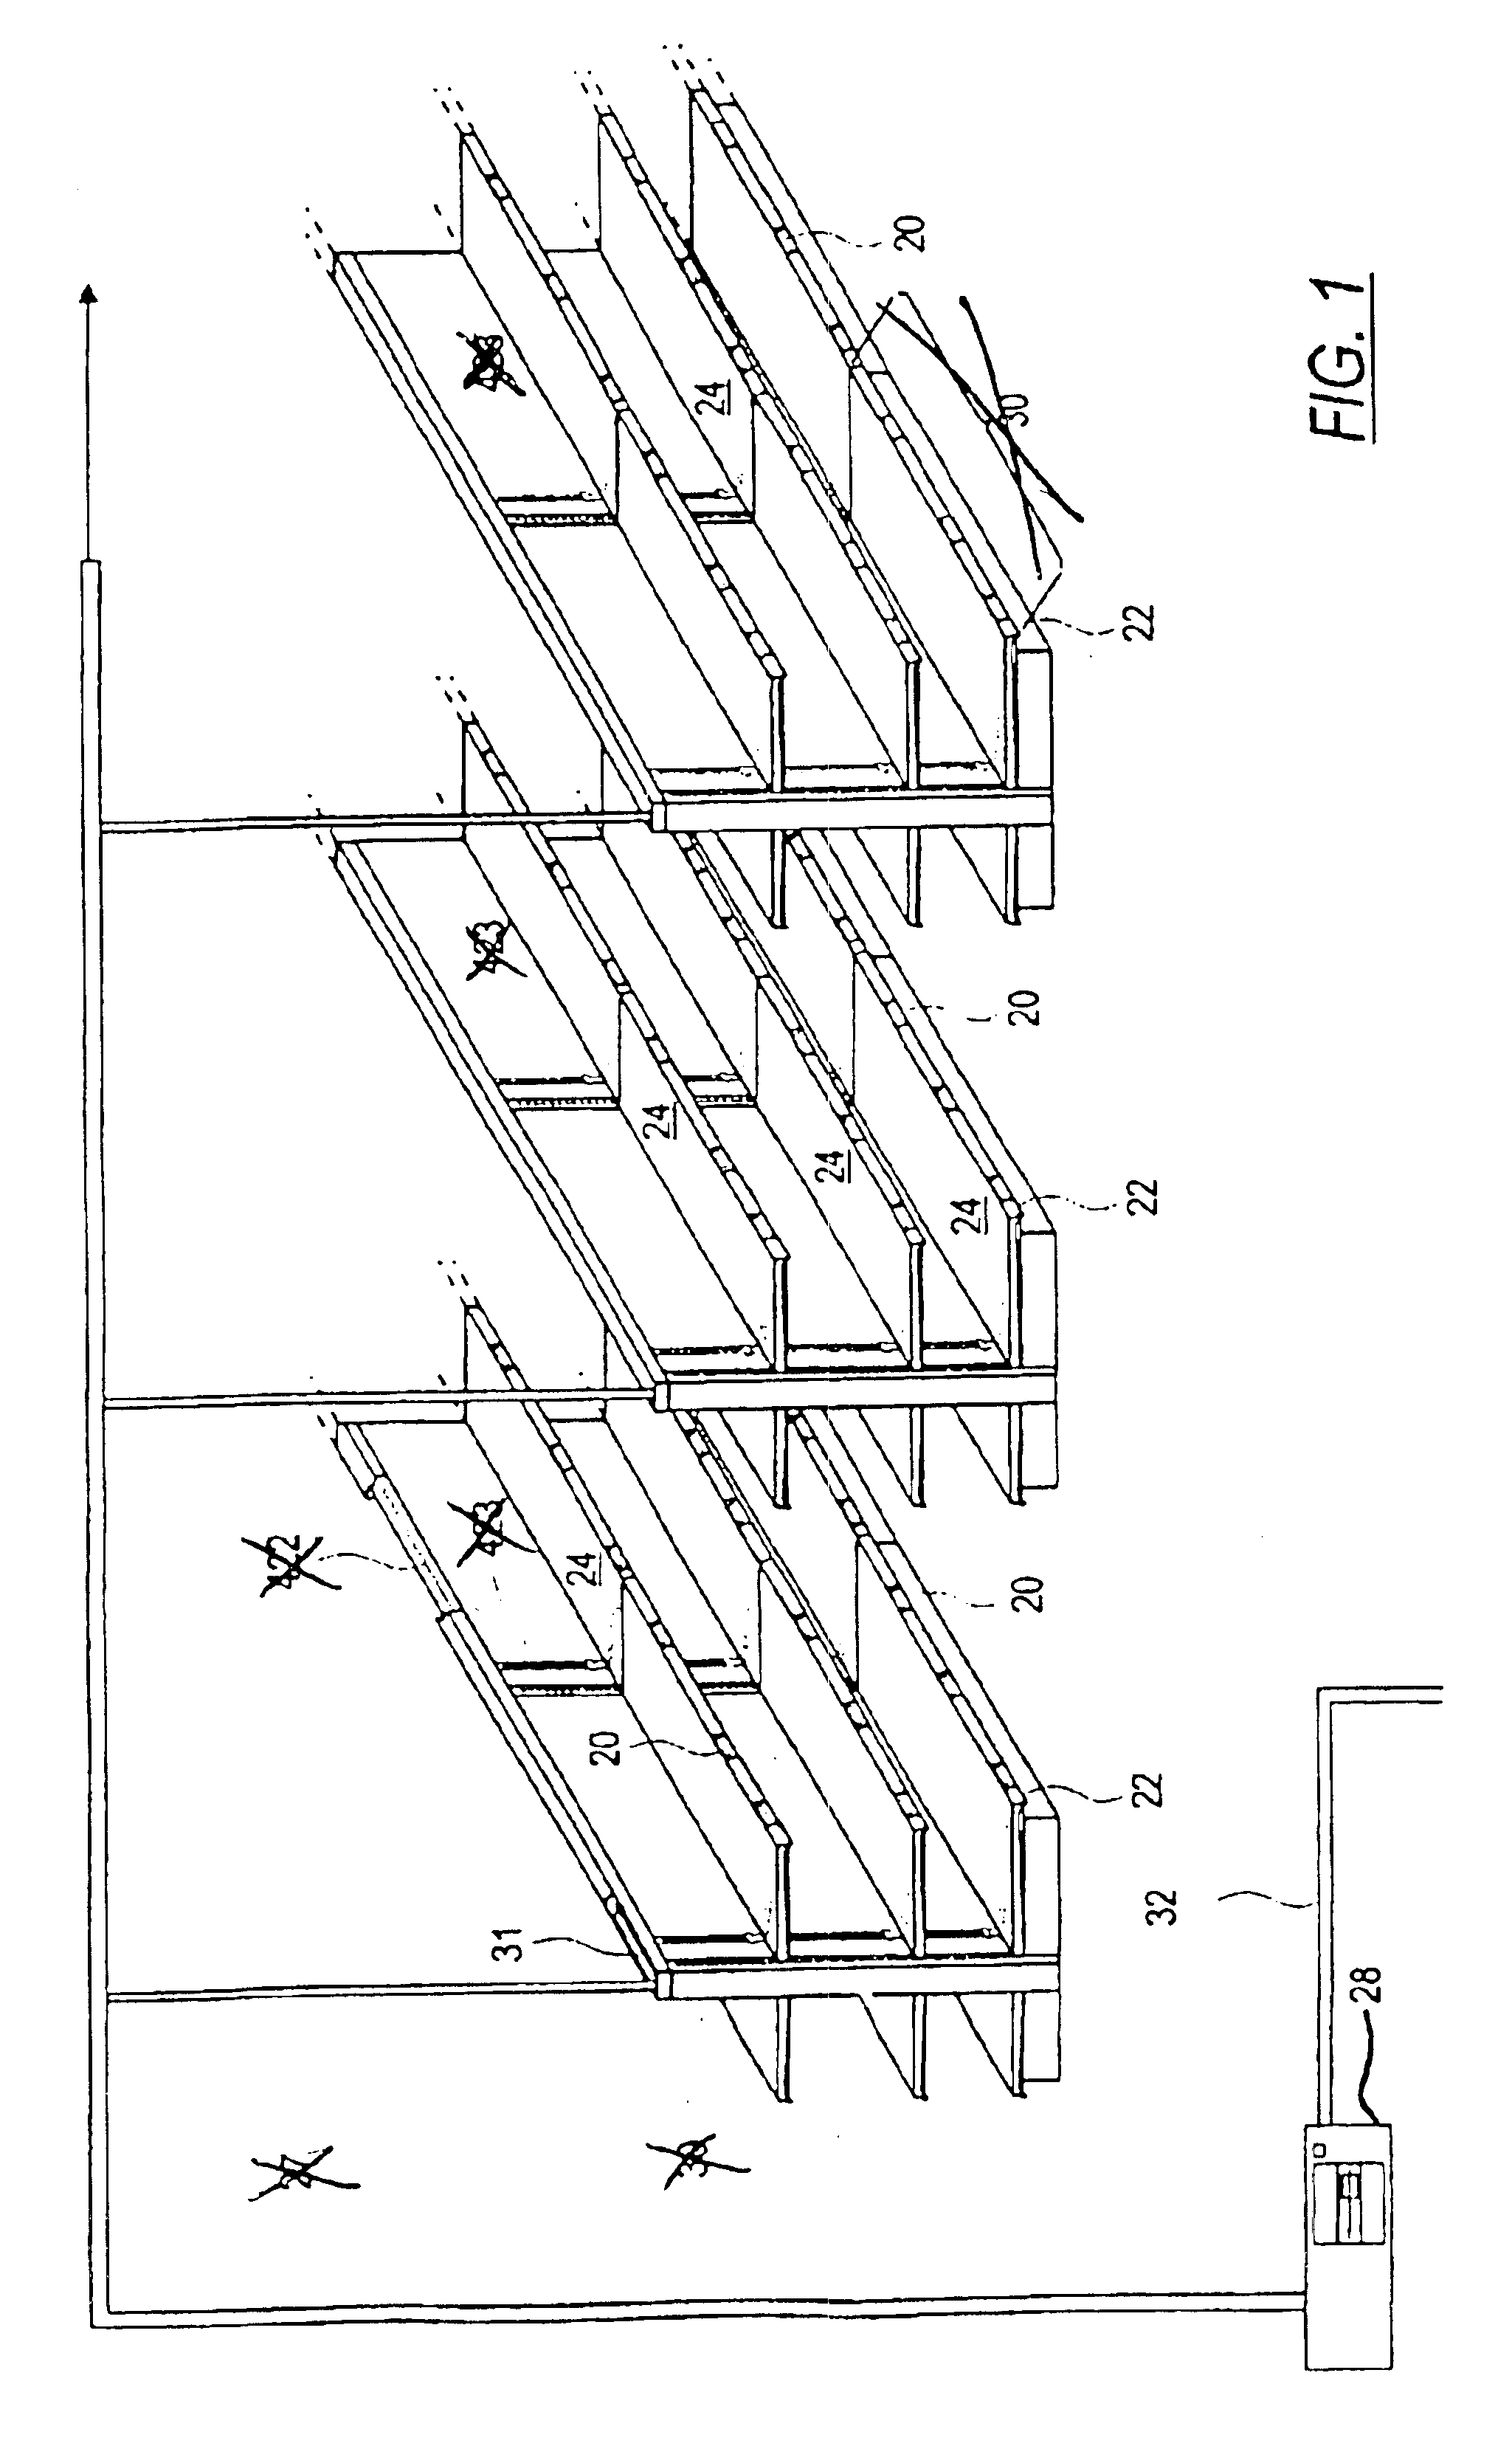 Electronic display system tag, related interface protocal and display methods